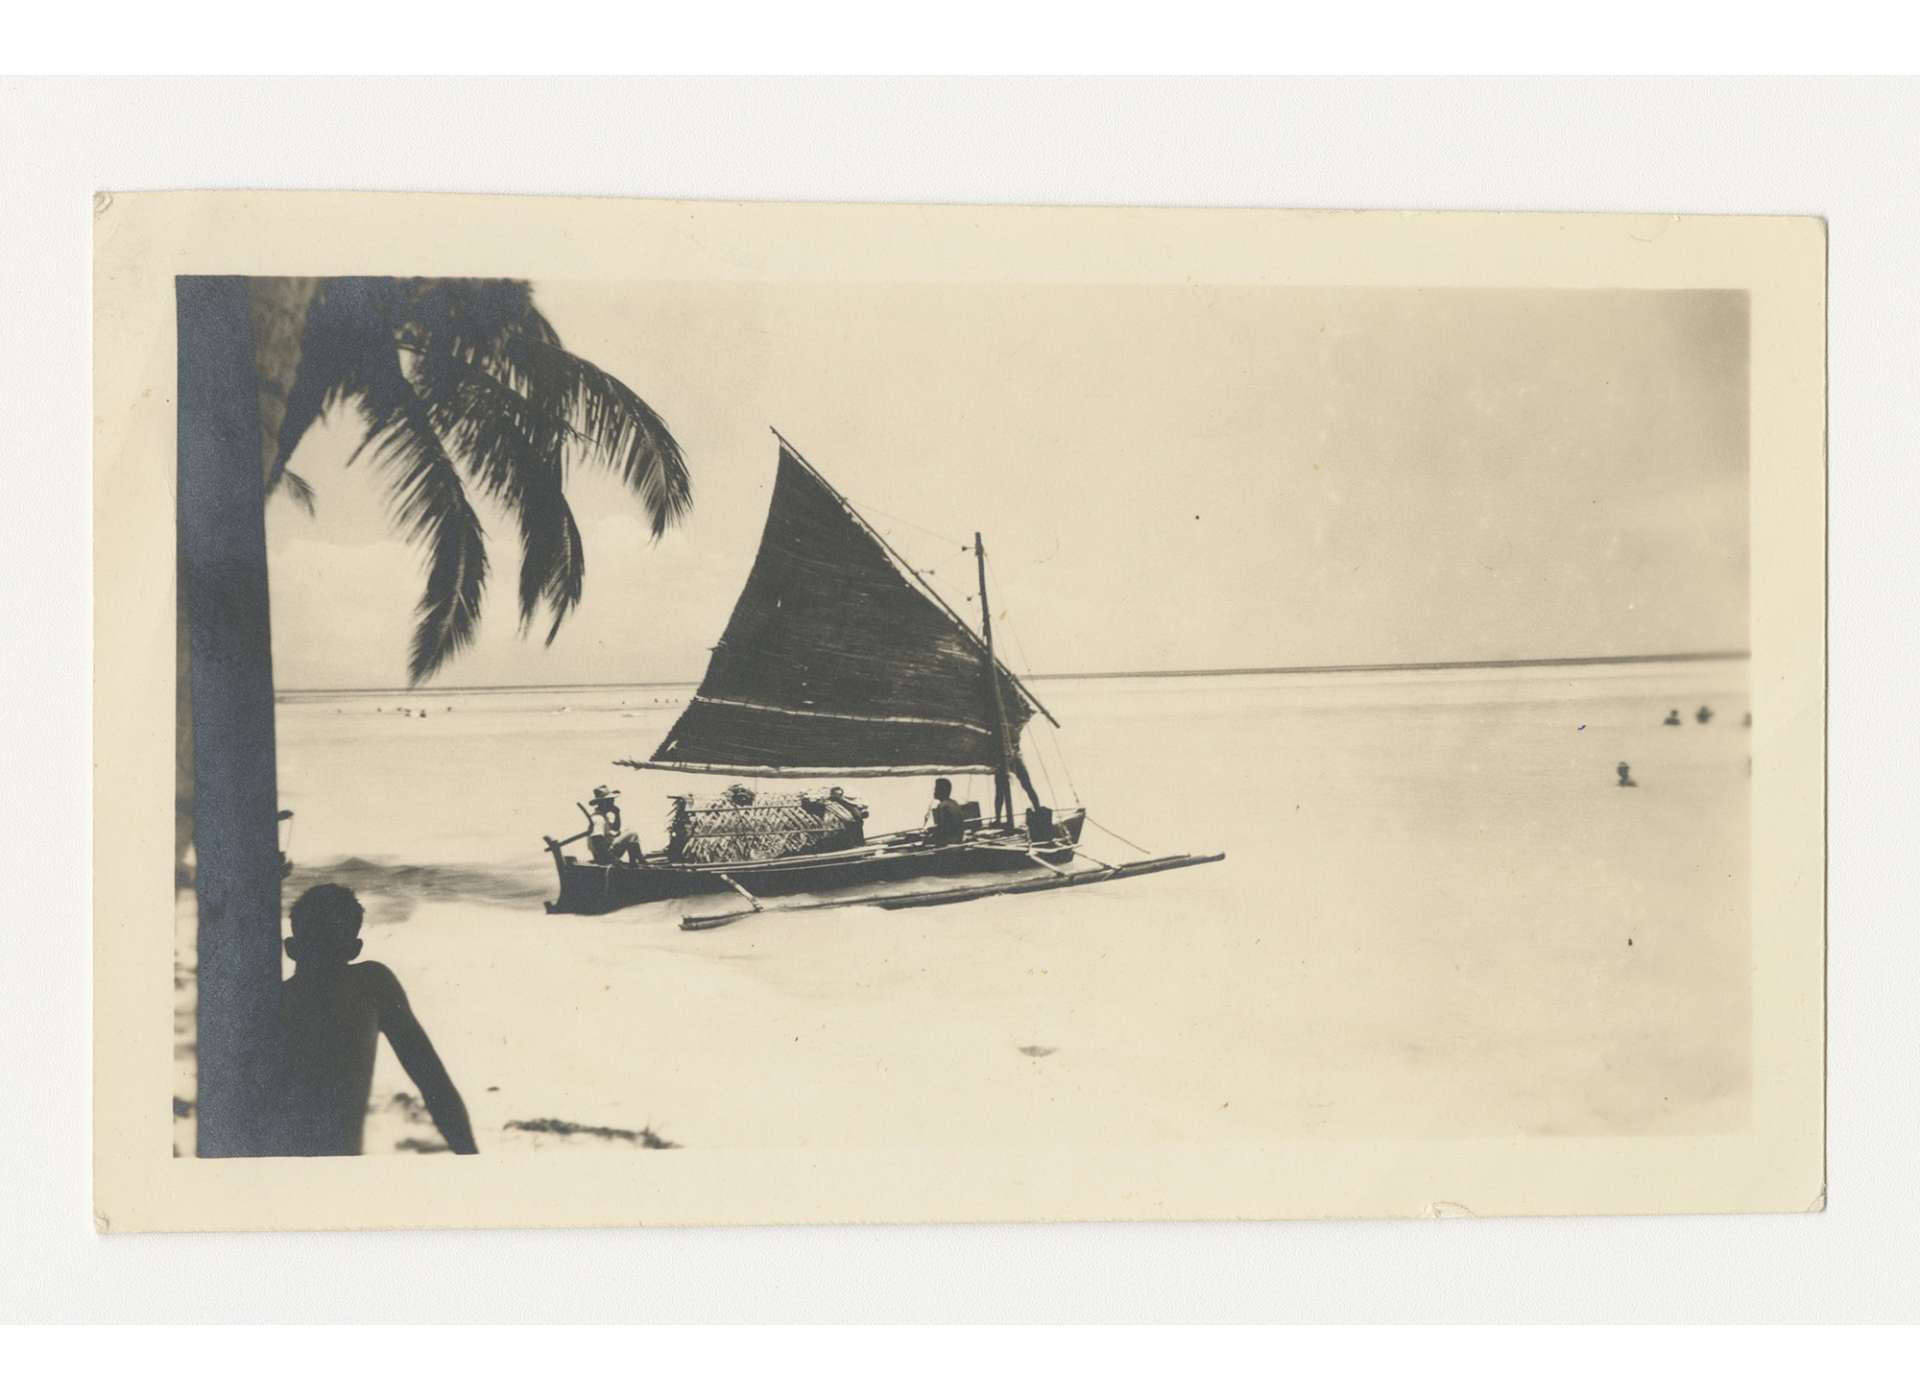 A wartime photo of a native outrigger canoe with a thatched-grass sail on Palawan. An outrigger similar to this helped guerrillas of the Palawan Special Battalion transport former-POWs about 25 miles south to the base at Brooke’s Point. Filipinos in an outrigger canoe with a thatched-grass sail on Palawan, 1945. Gift in Memory of John O. Spinks, Sr., from the Collection of The National World War II Museum, 2011.018.067.